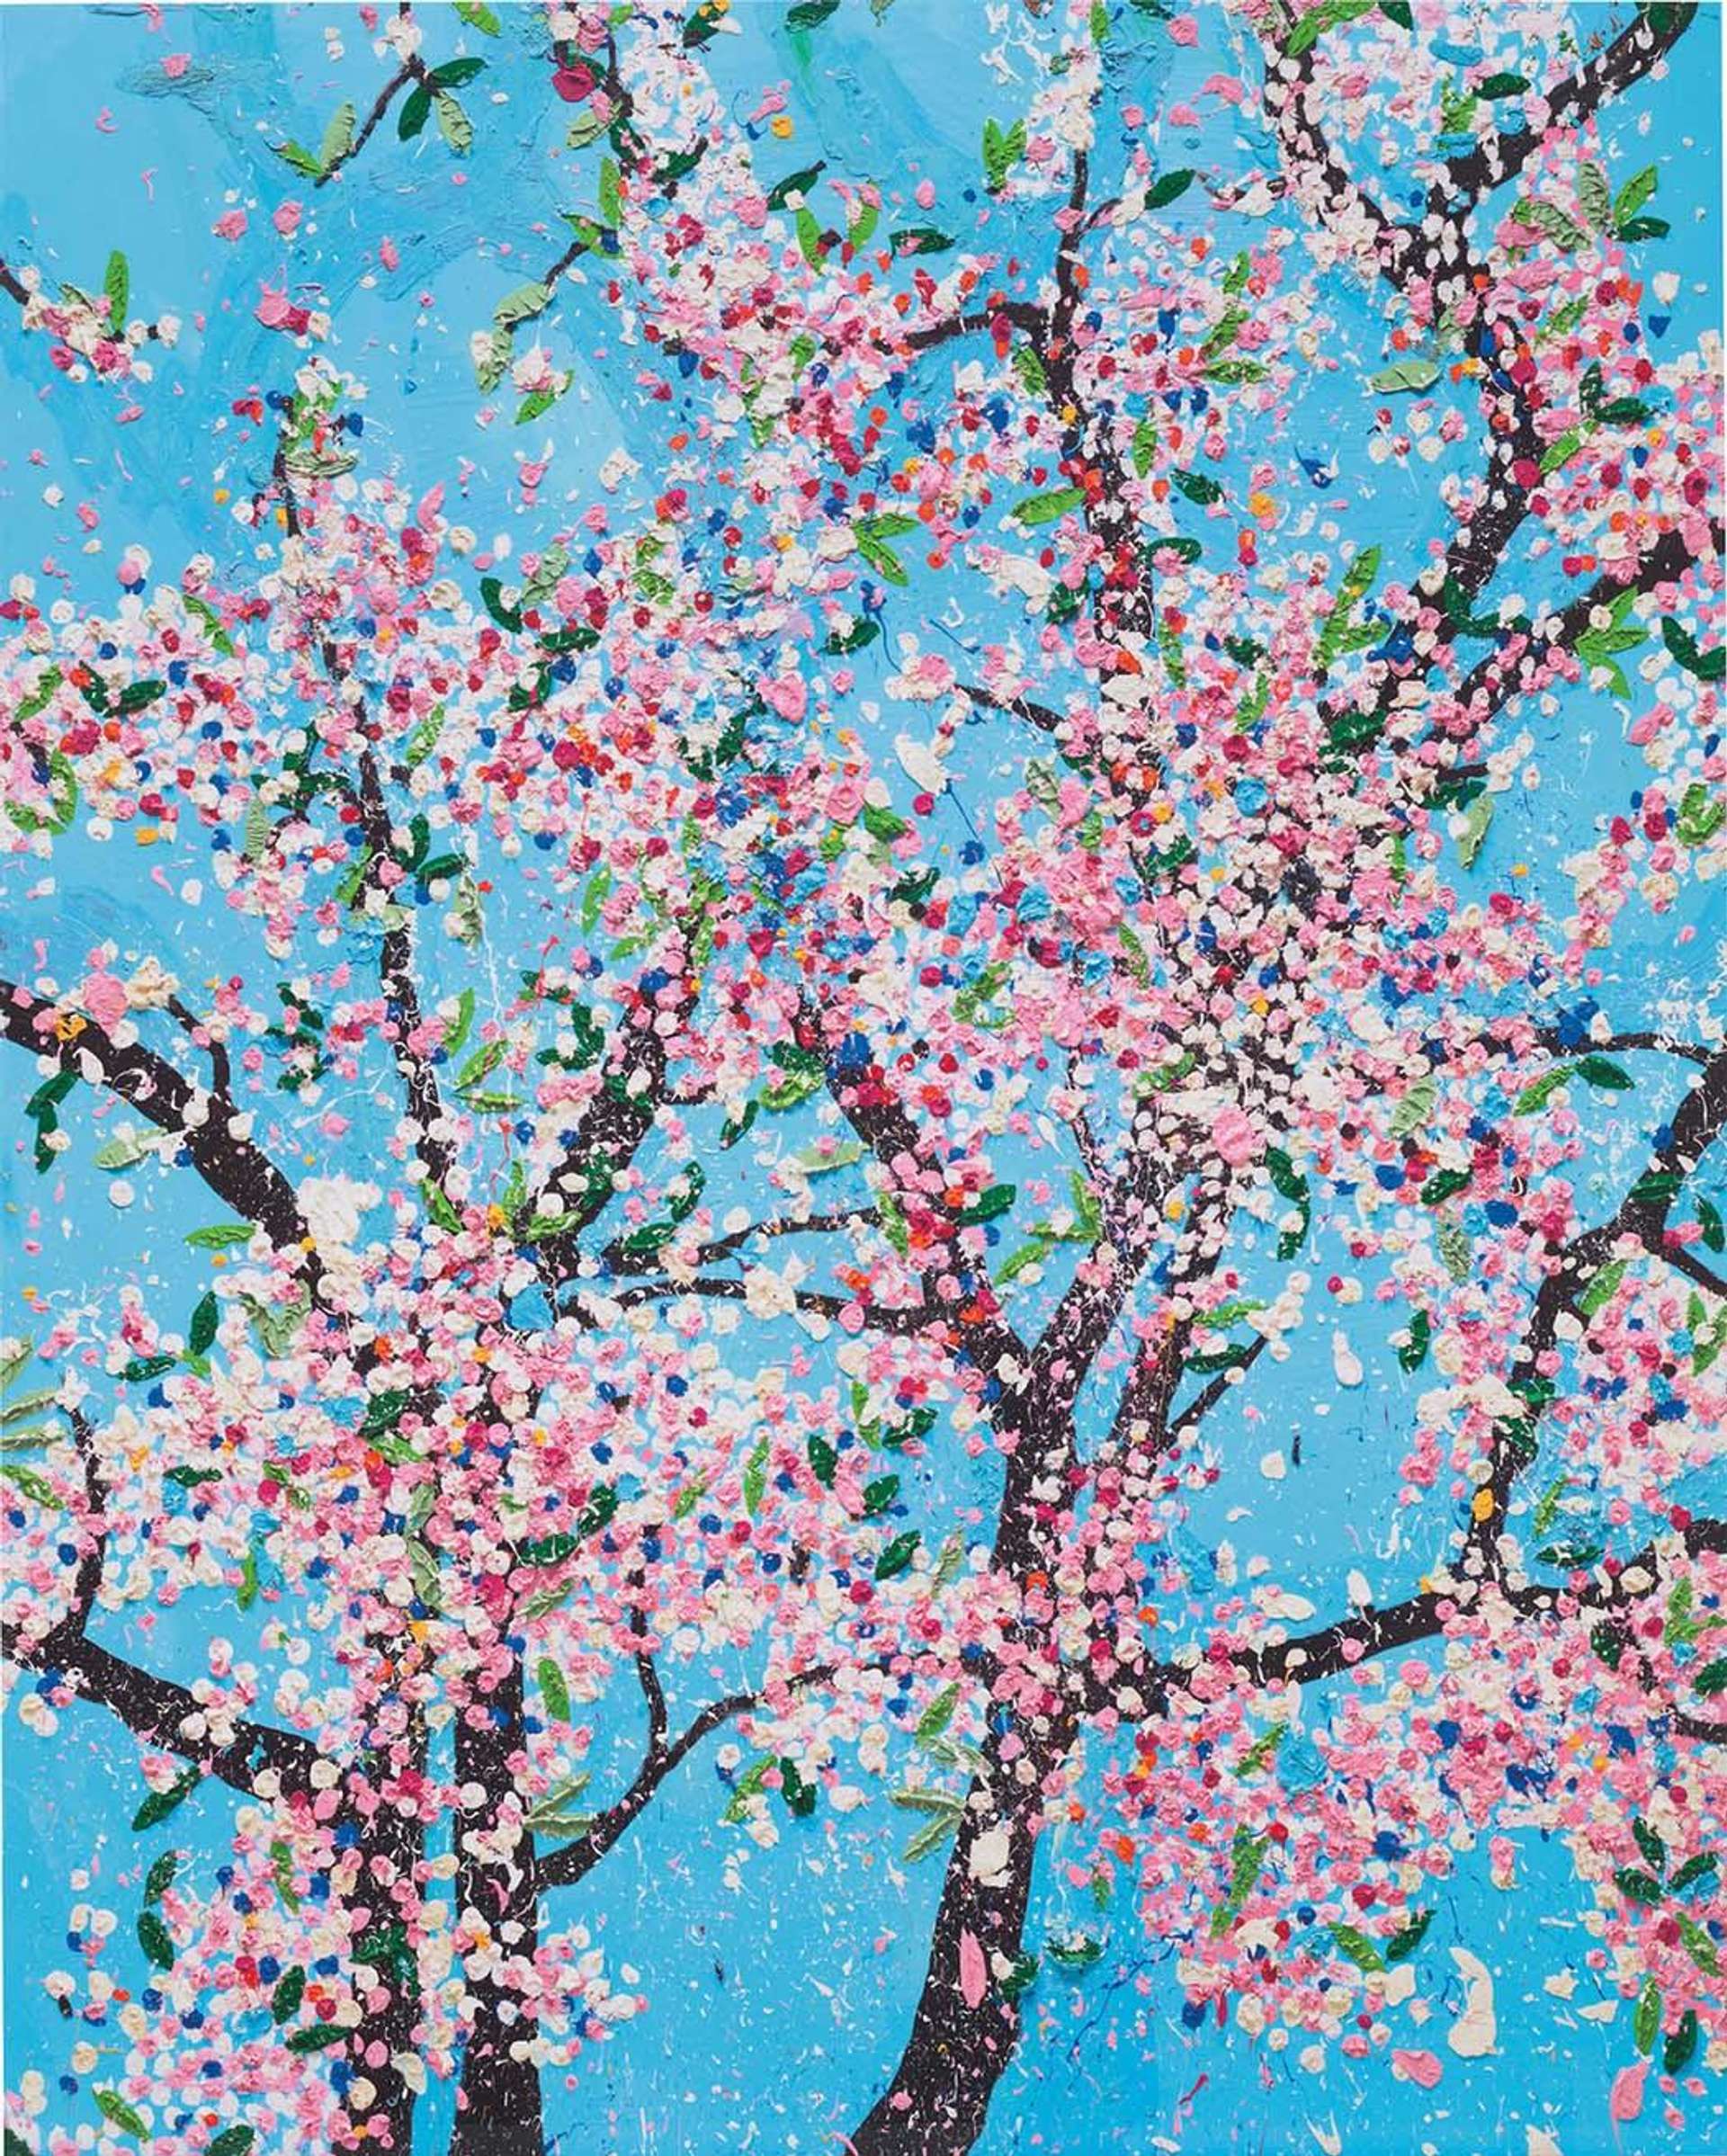 A Giclée print print by Damien Hirst depicting a cherry blossom tree against a blue background.